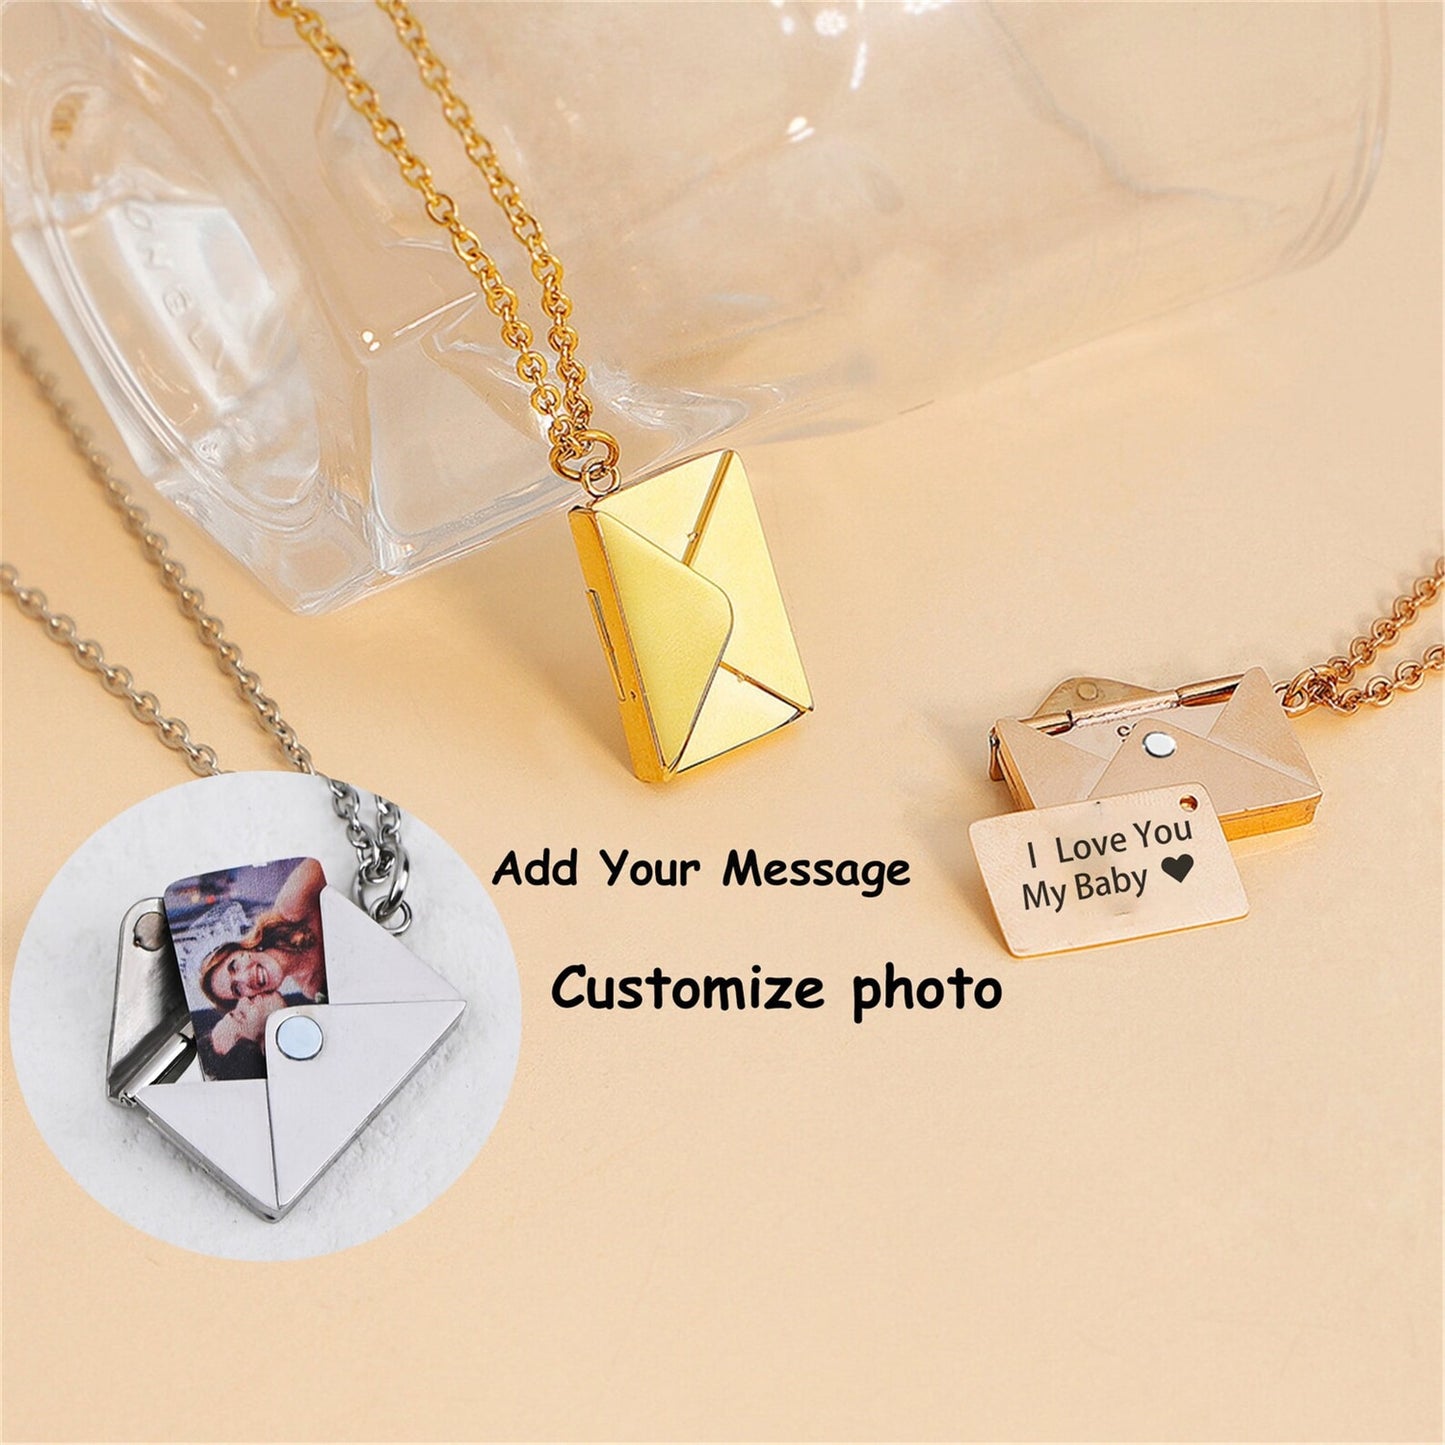 Custom envelope photo  Necklace Hidden Photo Jewelry Gift For Her